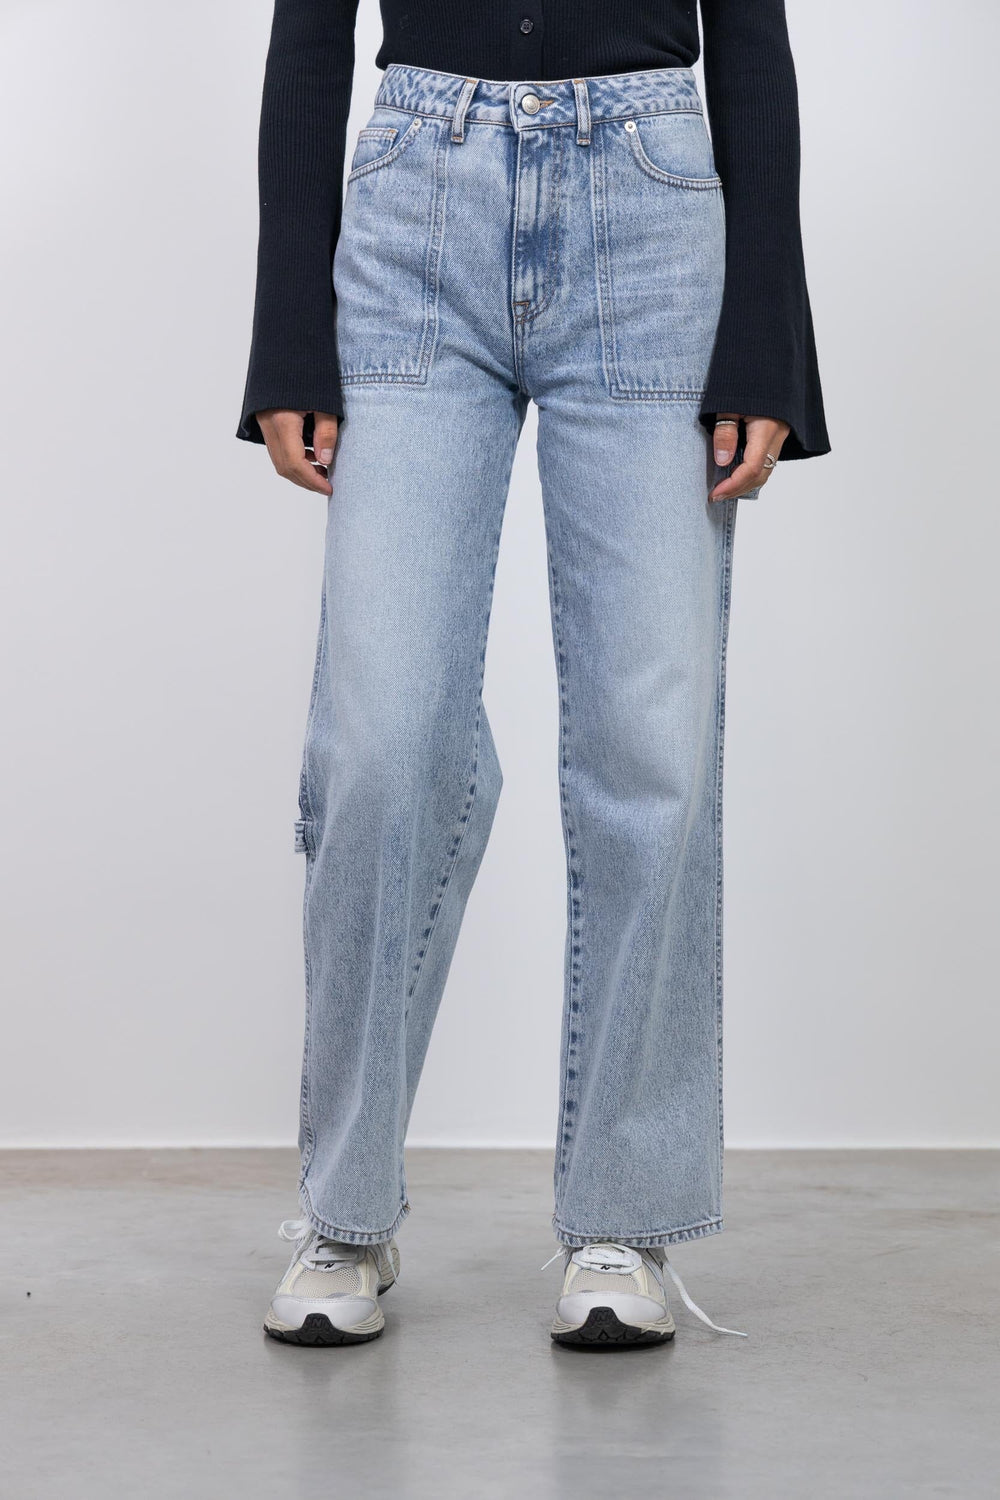 Blue Mid Rise Balloon Fit Cargo Jeans